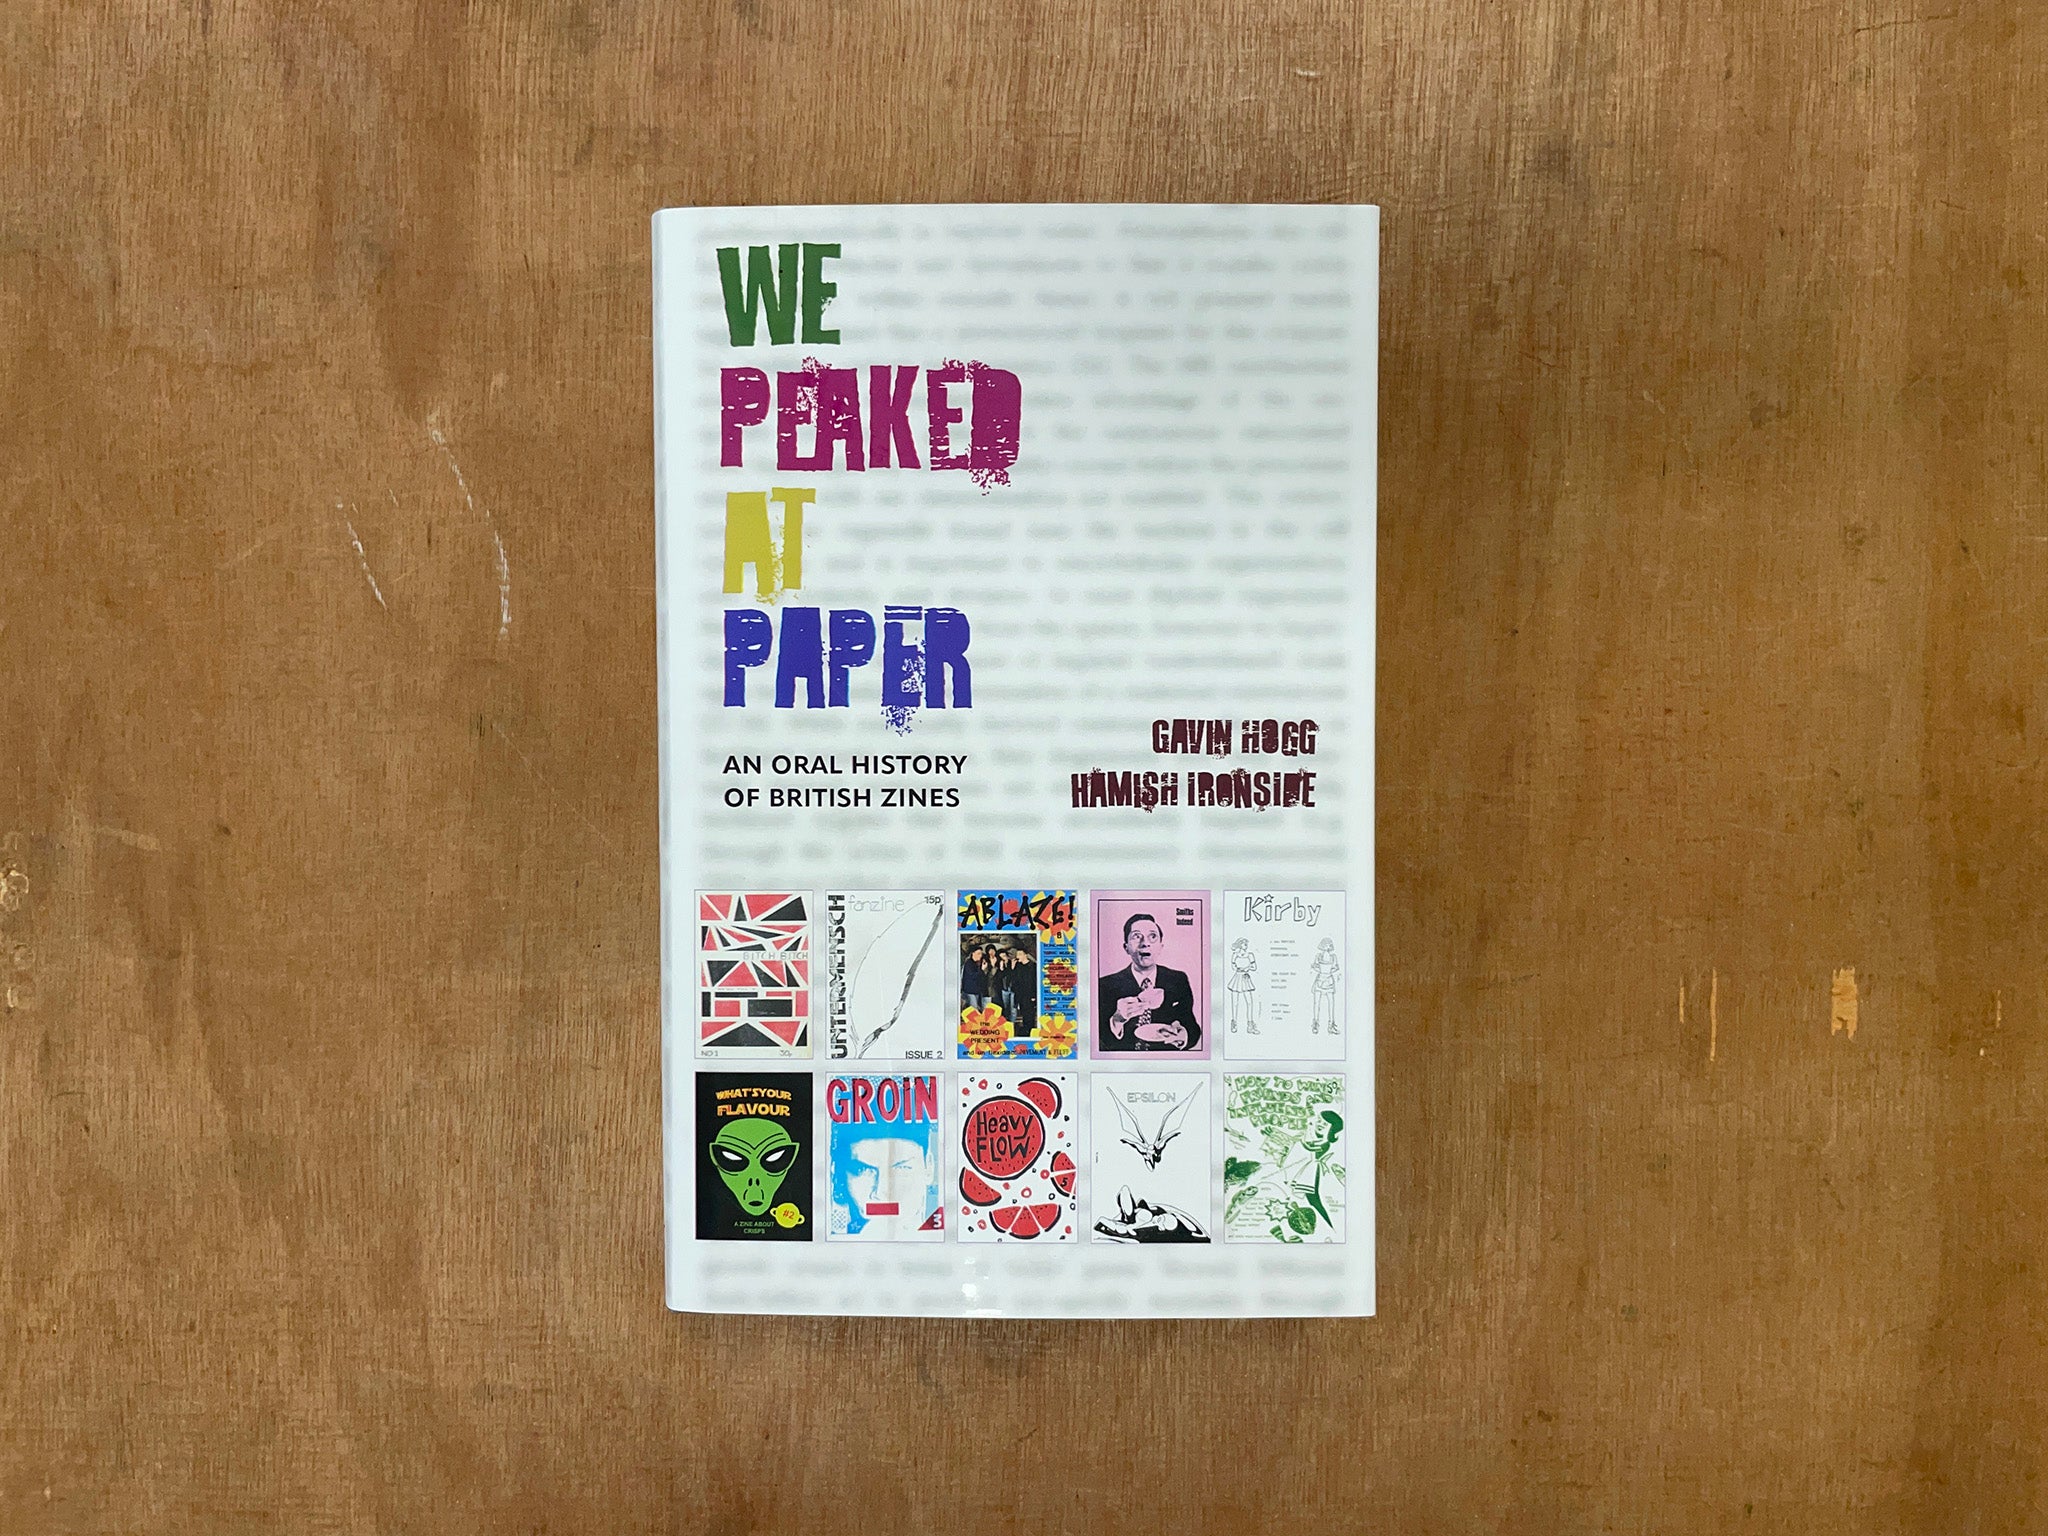 WE PEAKED AT PAPER: AN ORAL HISTORY OF BRITISH ZINES by Gavin Hogg & Hamish Ironside